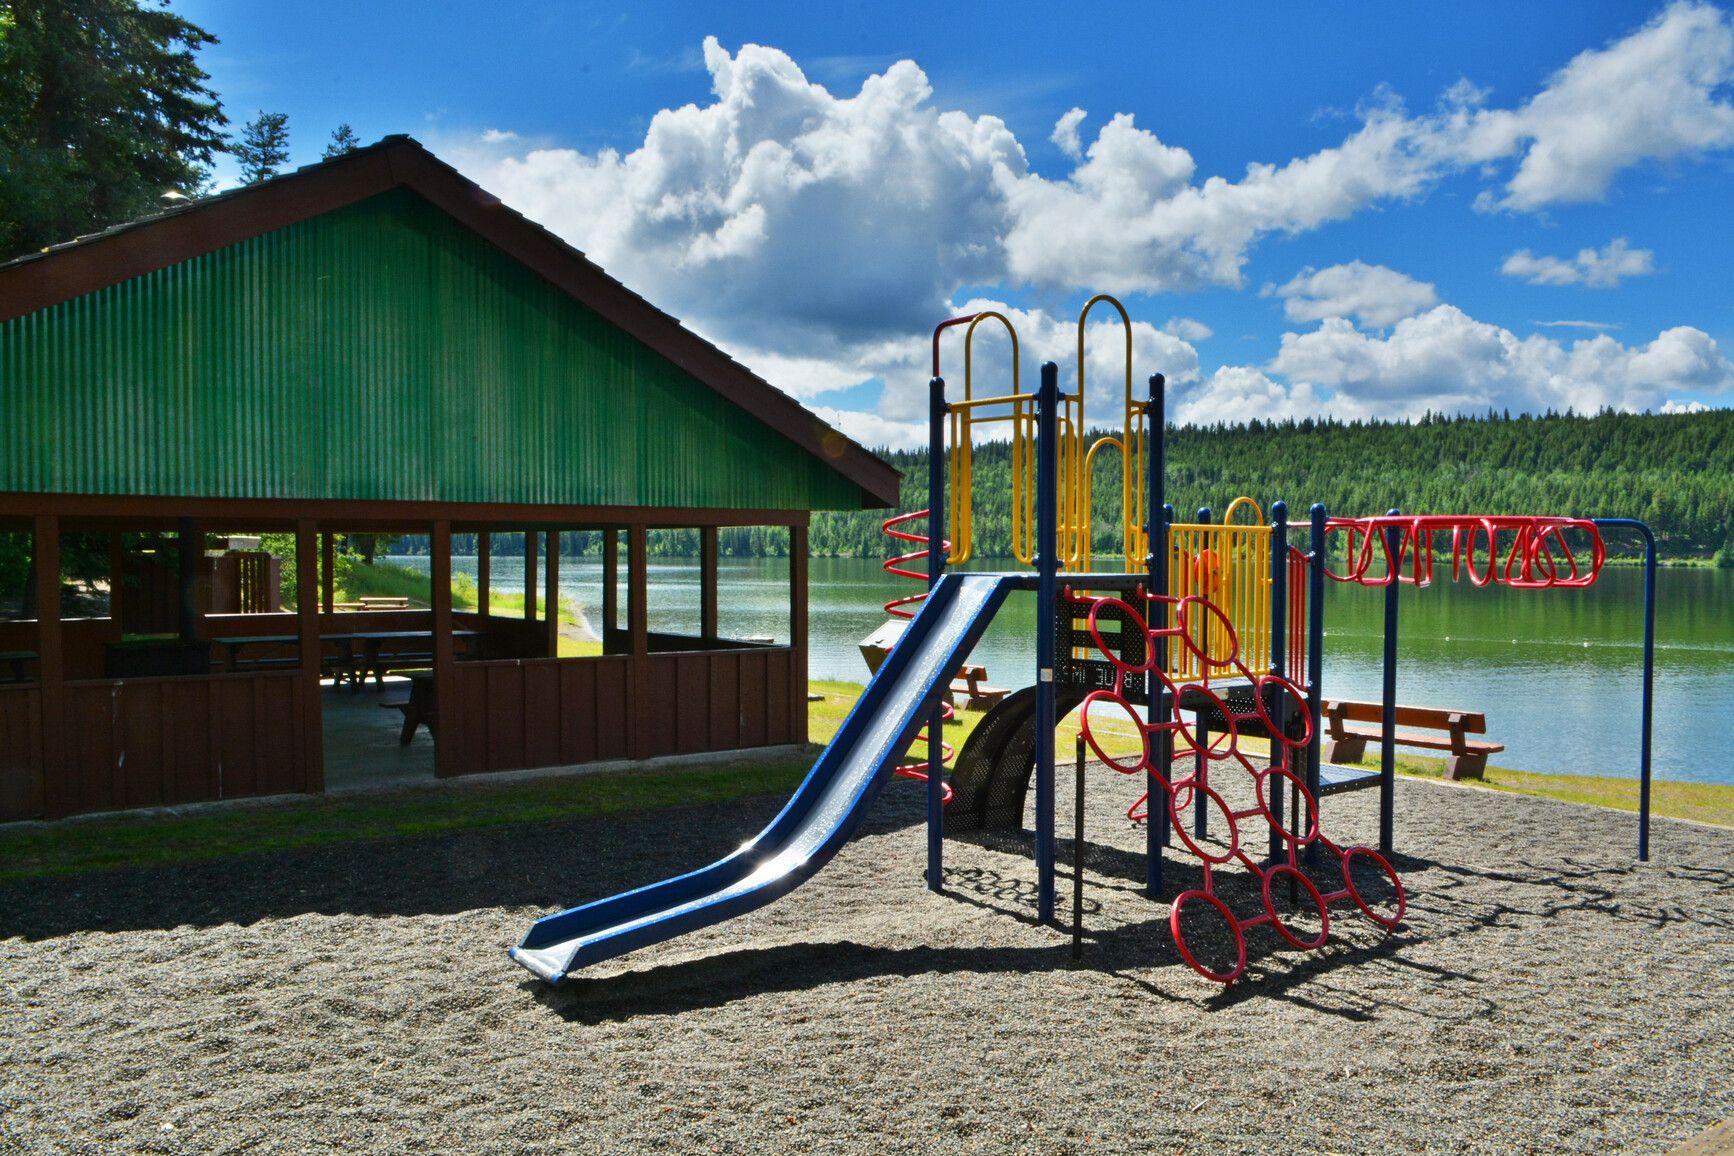 Near Lac La Hache's shoreline, you'll find a playground and picnic shelter, while across the lake lies a forested landscape.